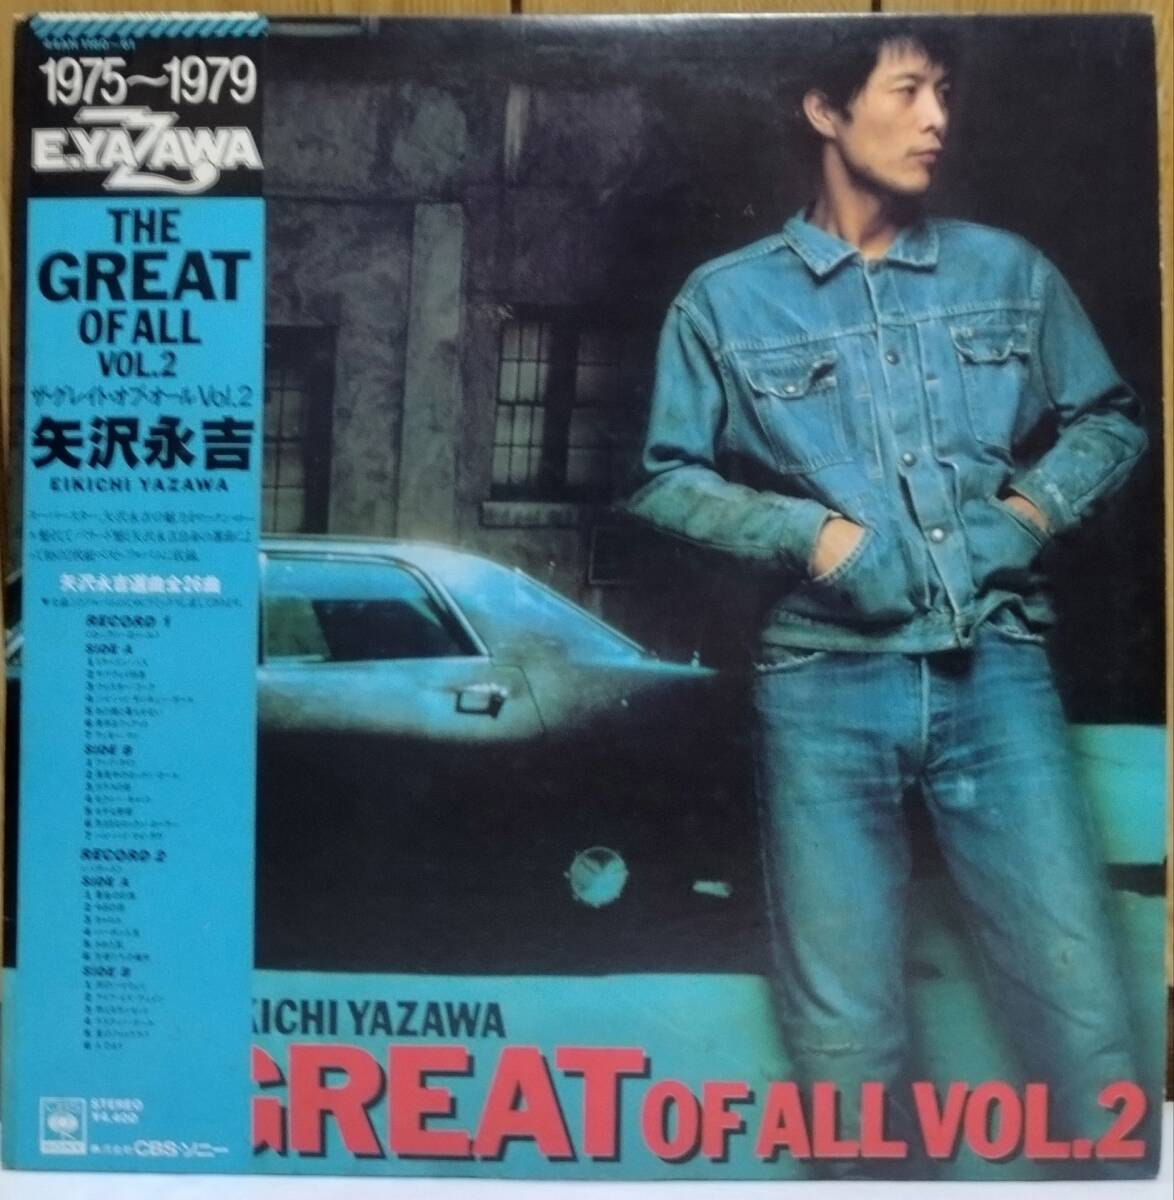 ☆ LP 矢沢永吉 / The Great Of All Vol.2 1975〜79 2枚組 44AH1160〜61 ☆_画像1